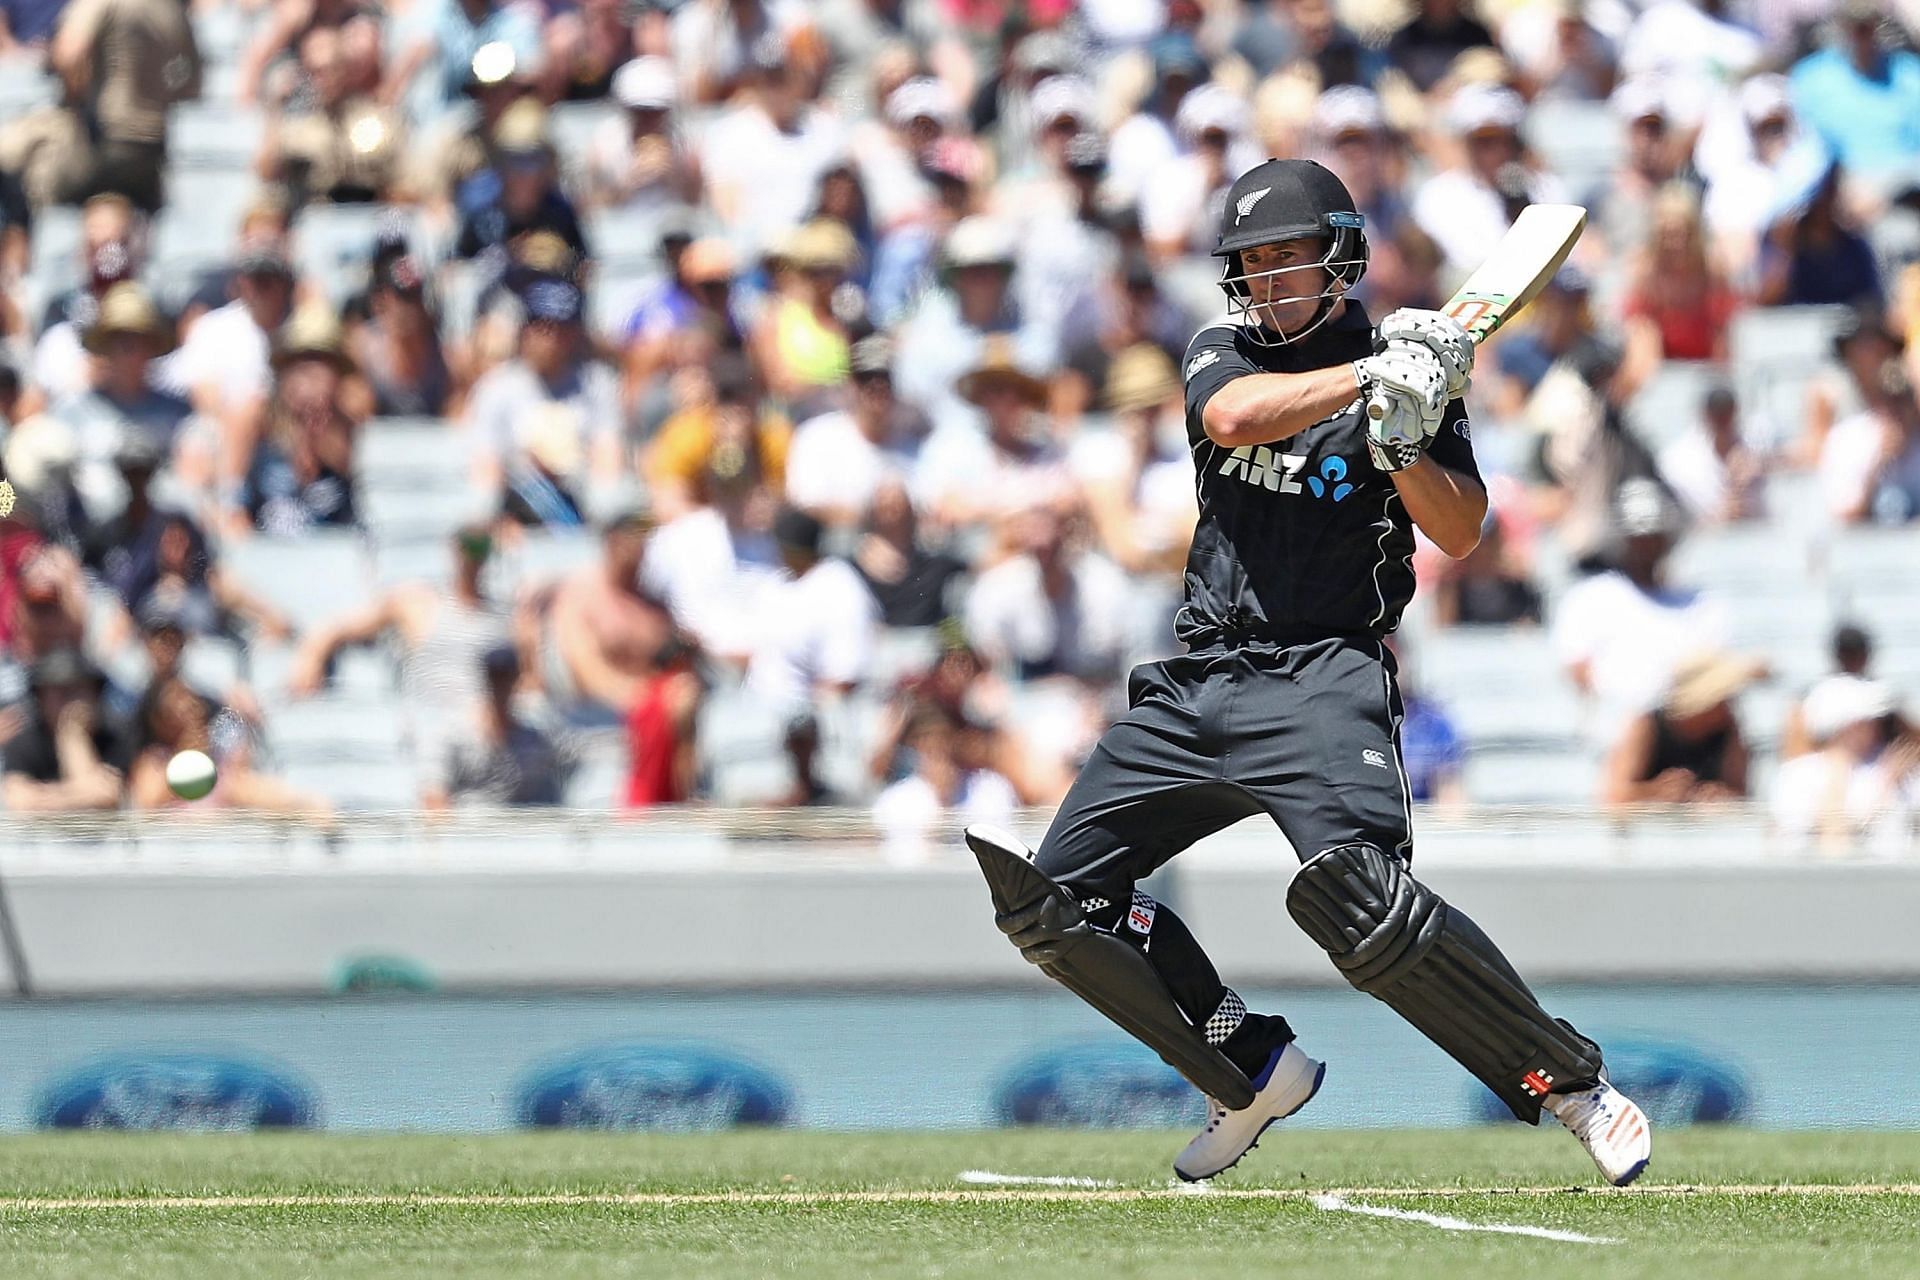 Neil Broom in action for New Zealand (Image Credits: ICC Cricket World Cup)